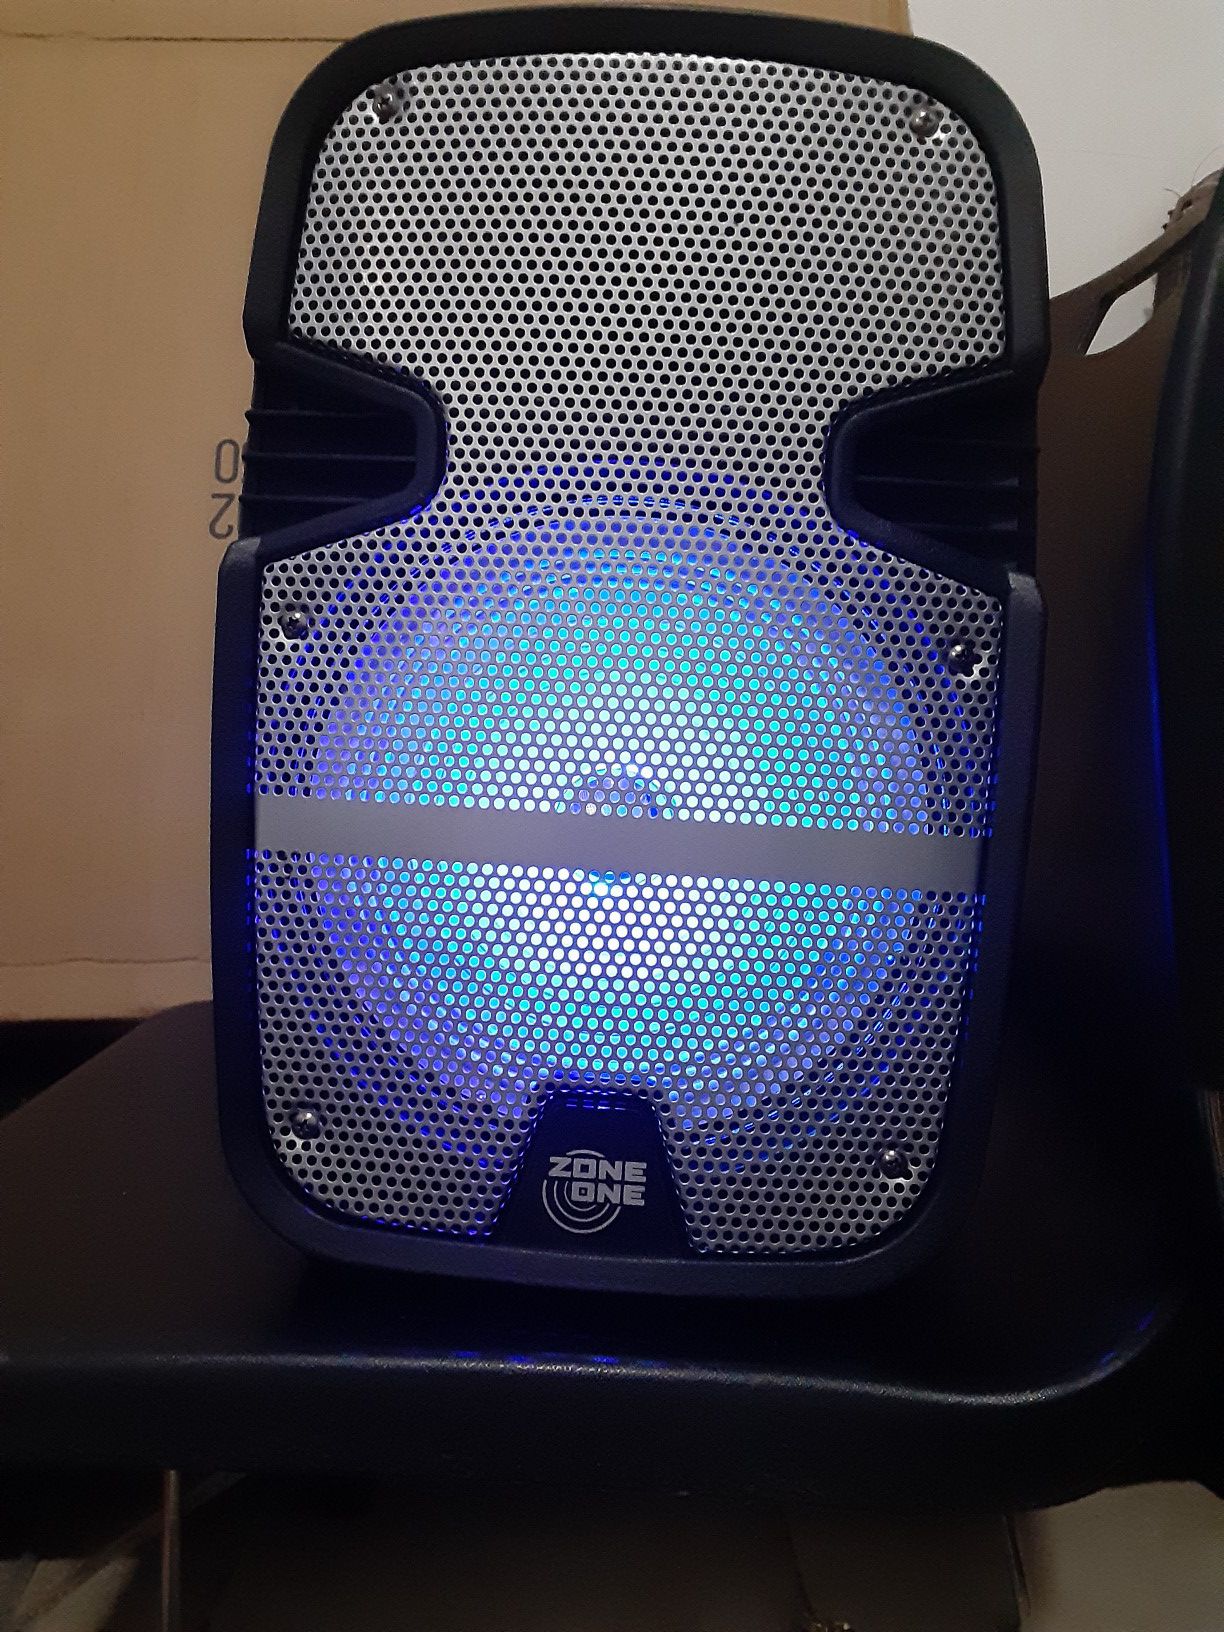 Speakers bluetooth 1500watts never used brand new in the box